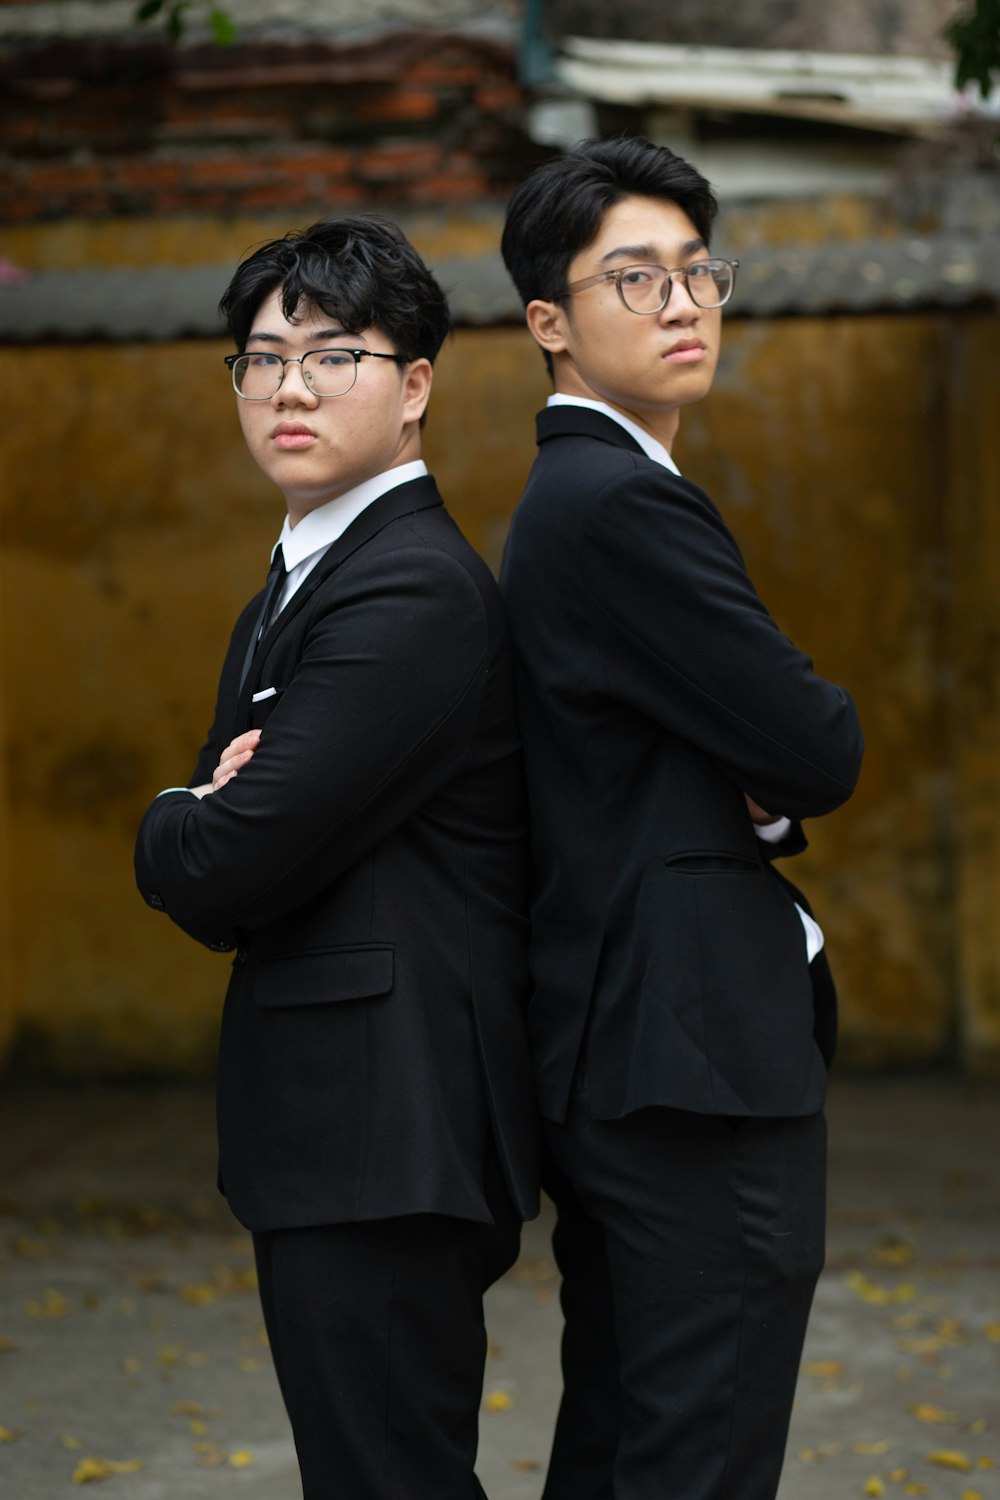 two asian men in suits standing next to each other